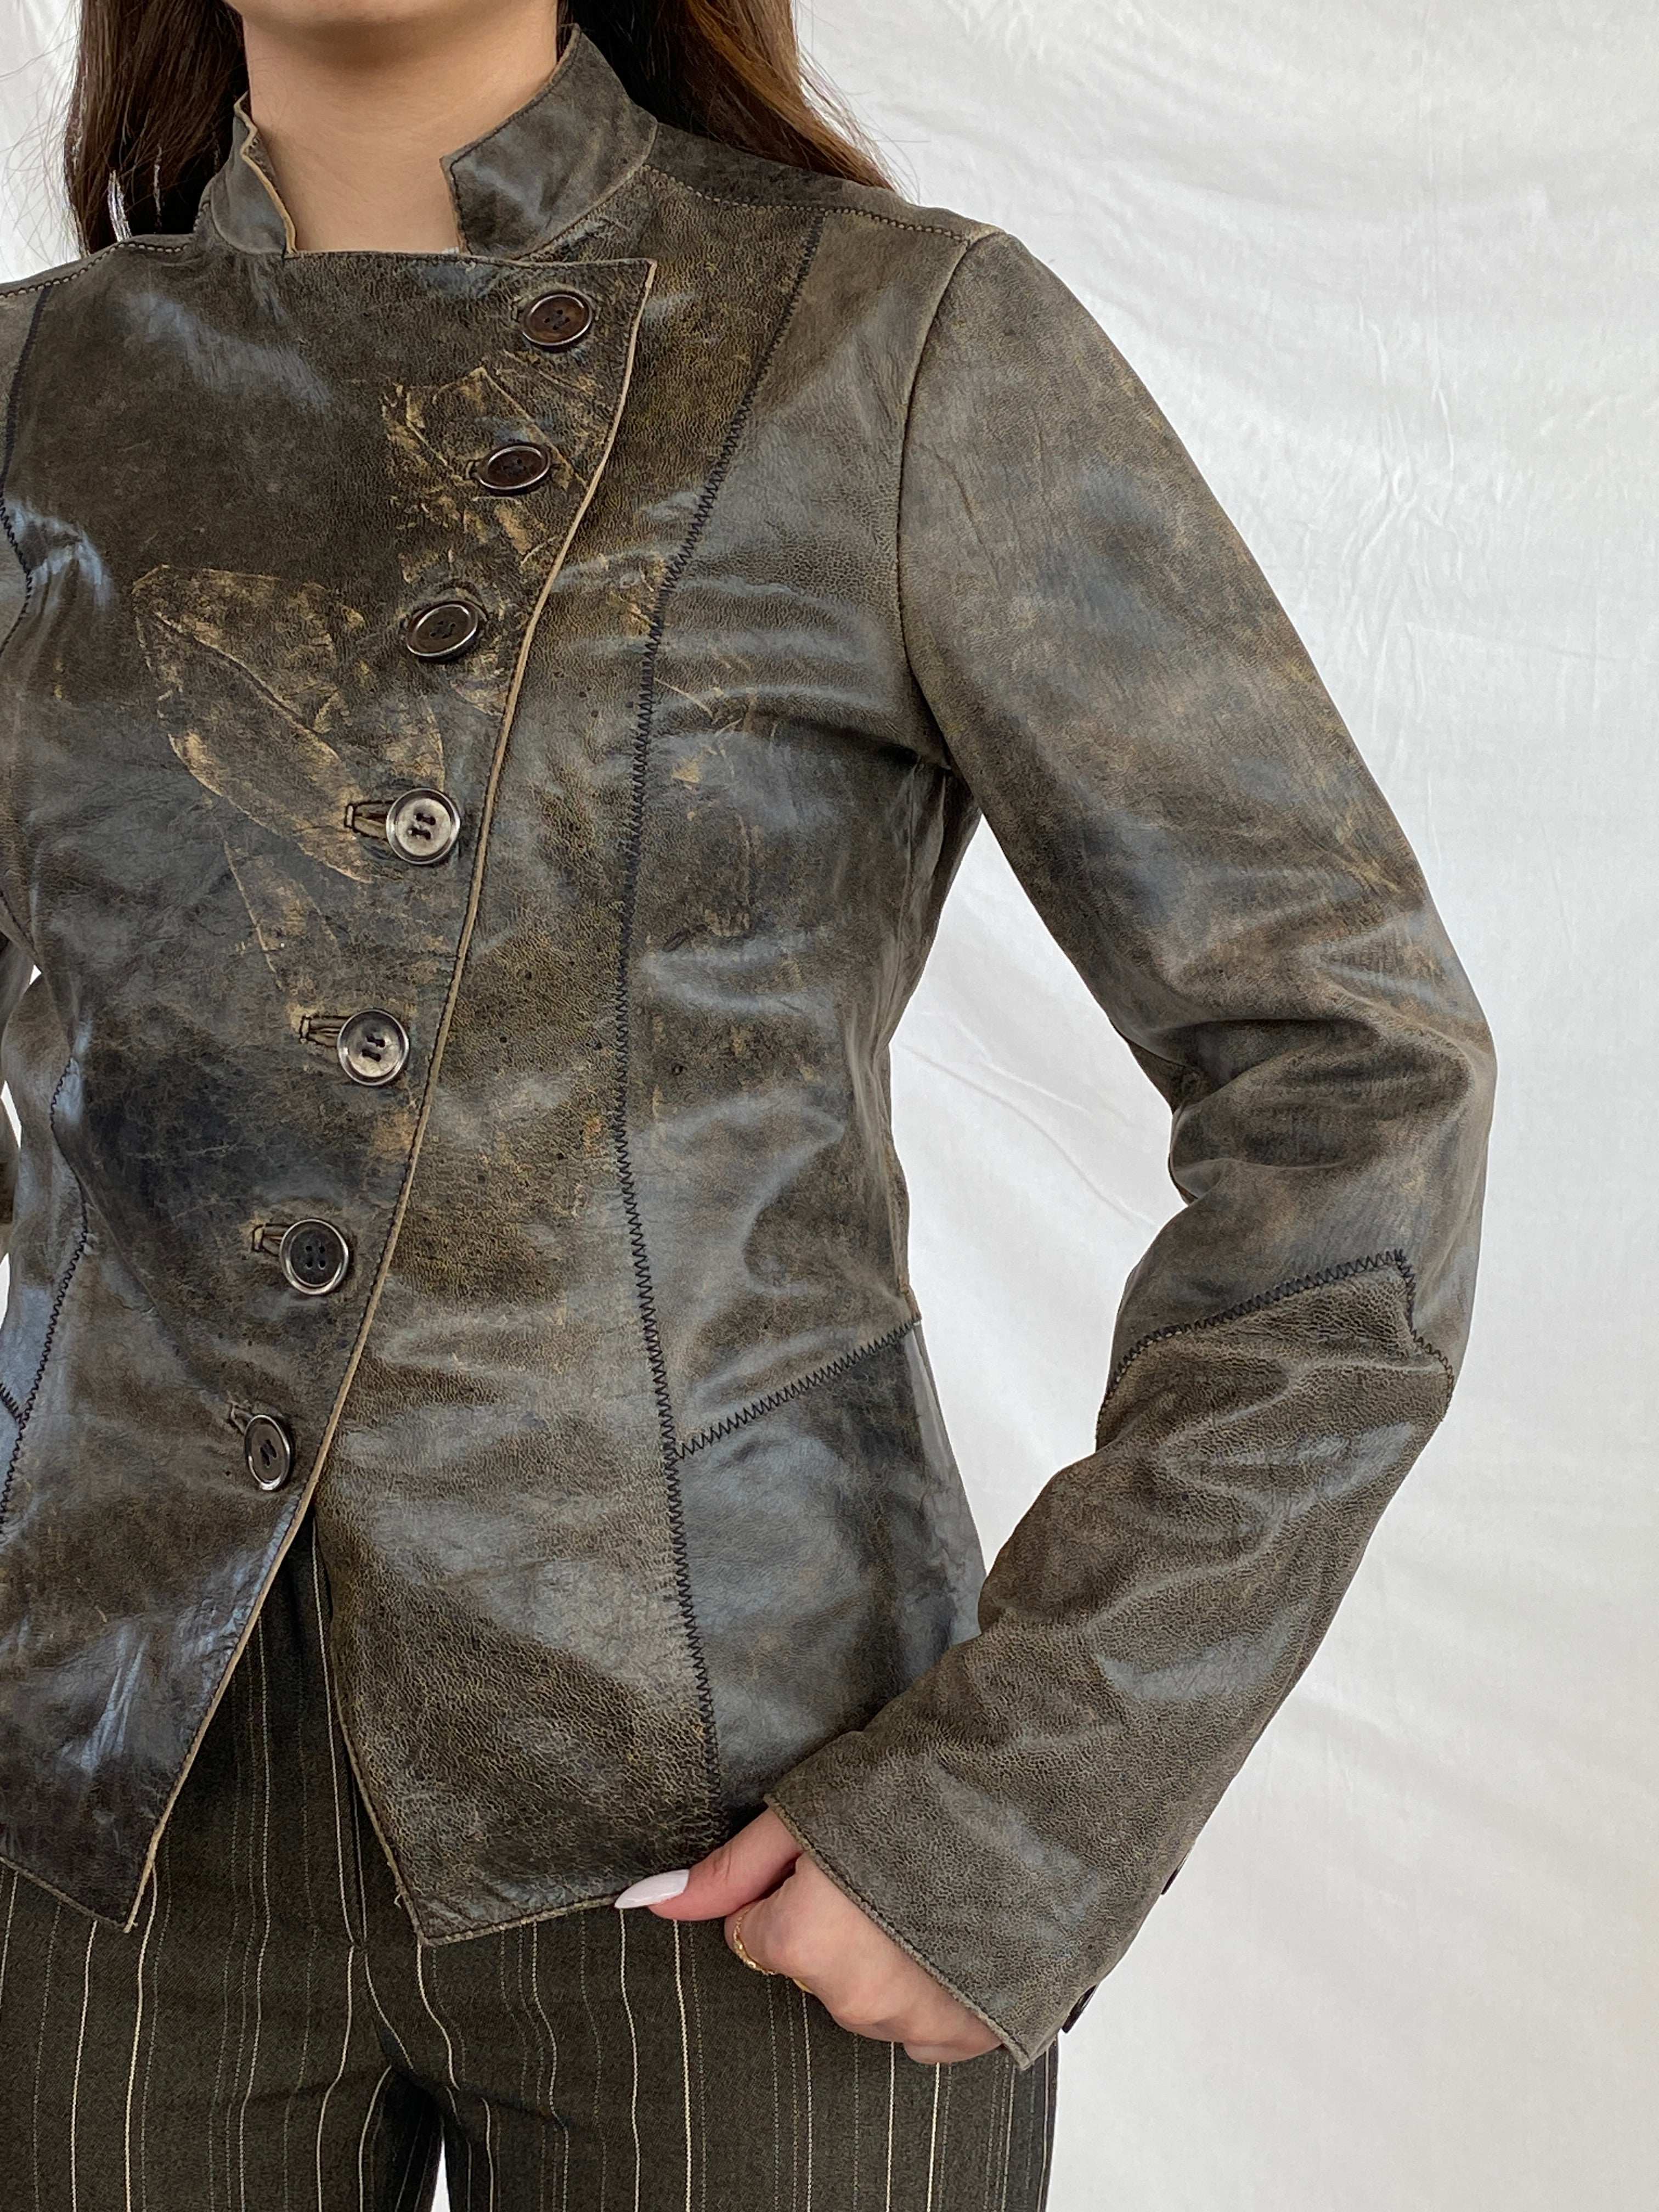 Statement Distressed Genuine Leather Jacket - Balagan Vintage Leather Jacket 00s, 90s, brown leather, genuine leather, genuine leather jacket, Juana, leather jacket, NEW IN